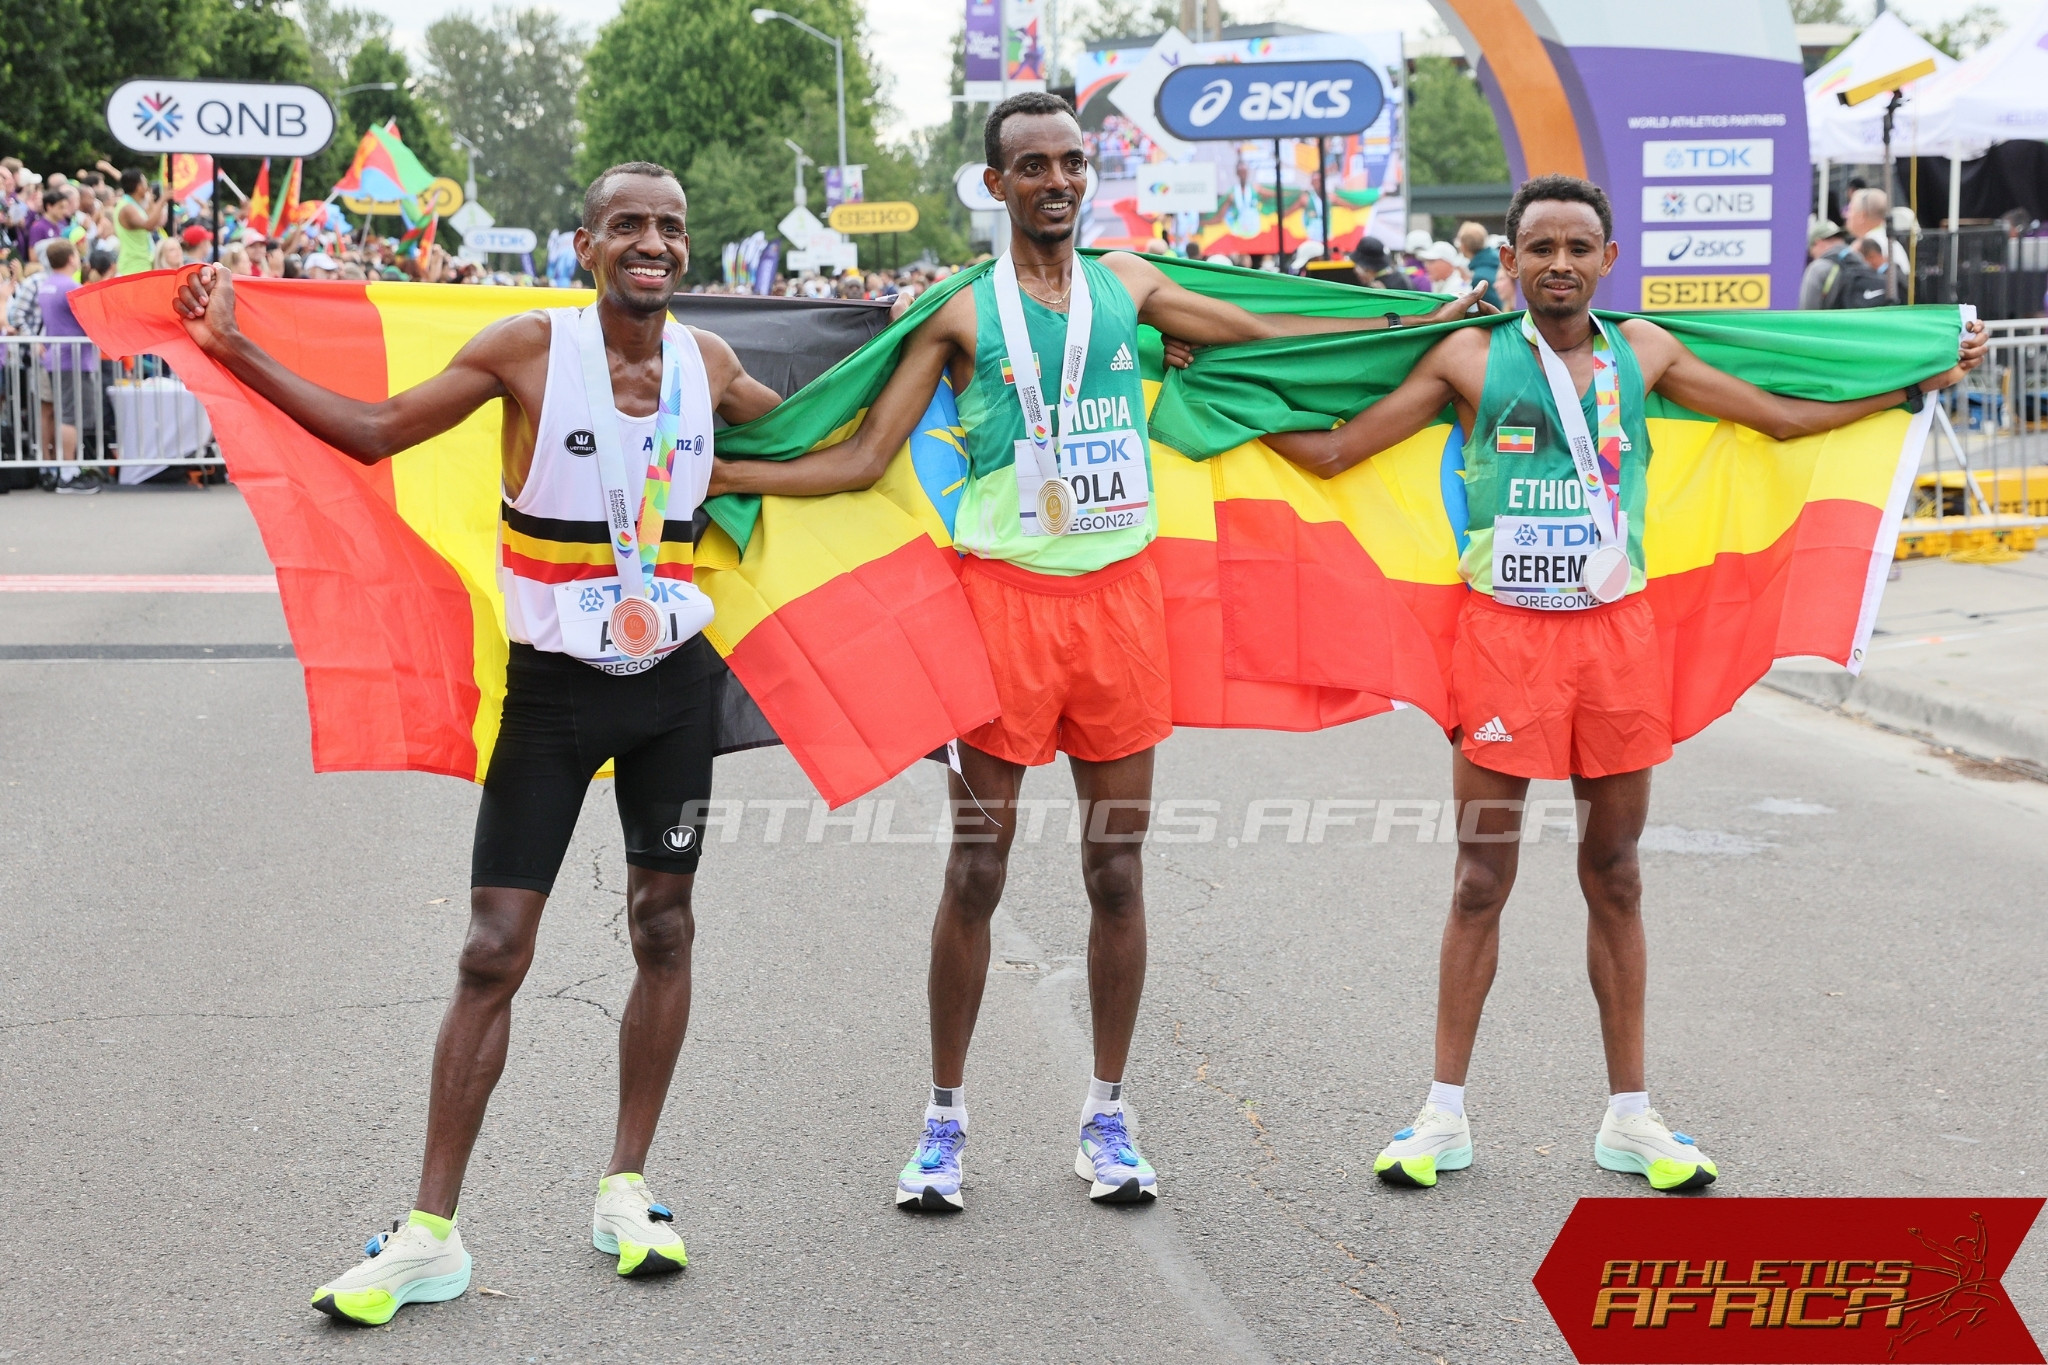 Ethiopia's Tamirat Tola flanked by compatriot Mosinet Geremew and Bashir Abdi on the podium after the men's marathon final / Photo credit: Getty Images for World Athletics